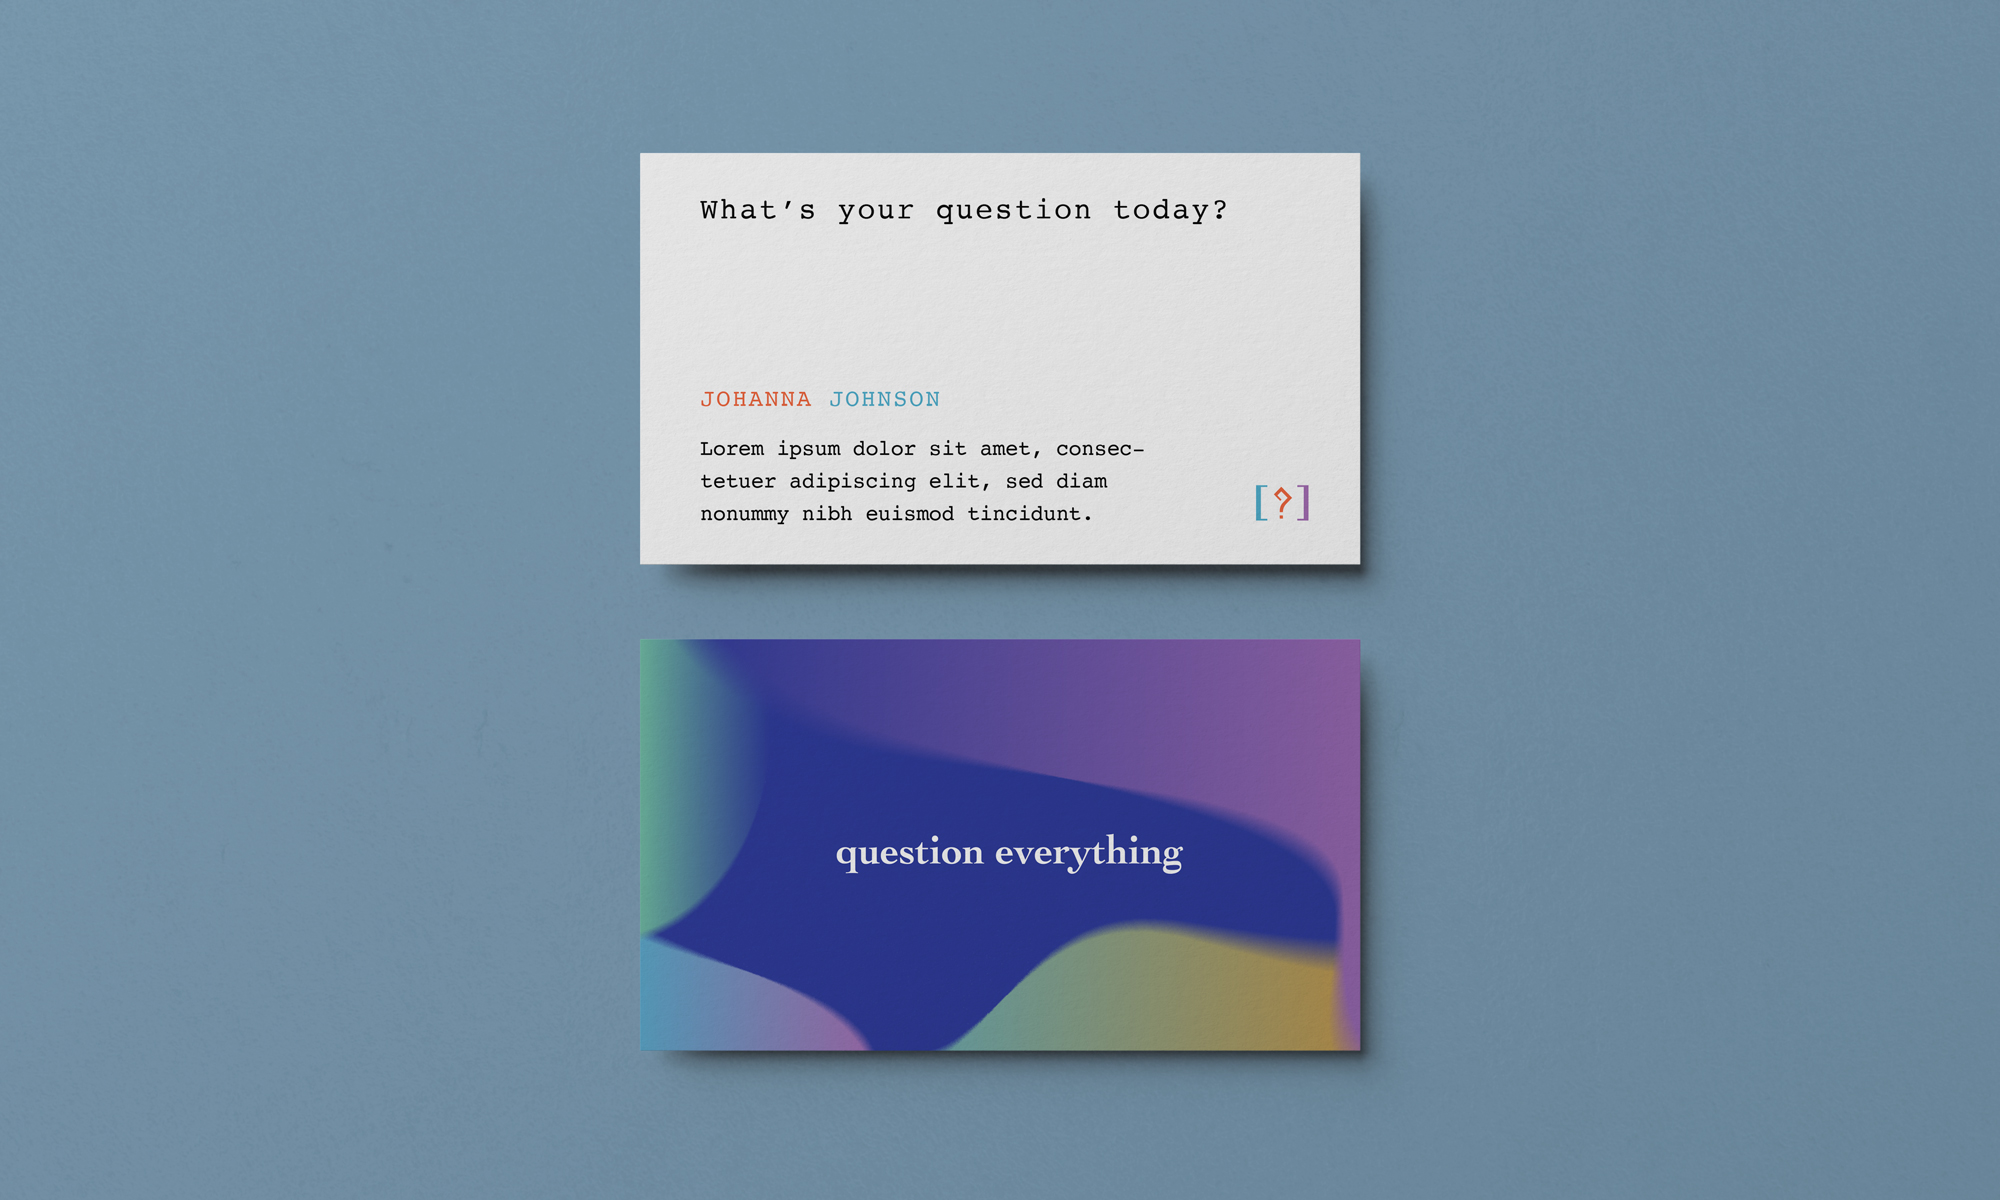 Identity on business cards